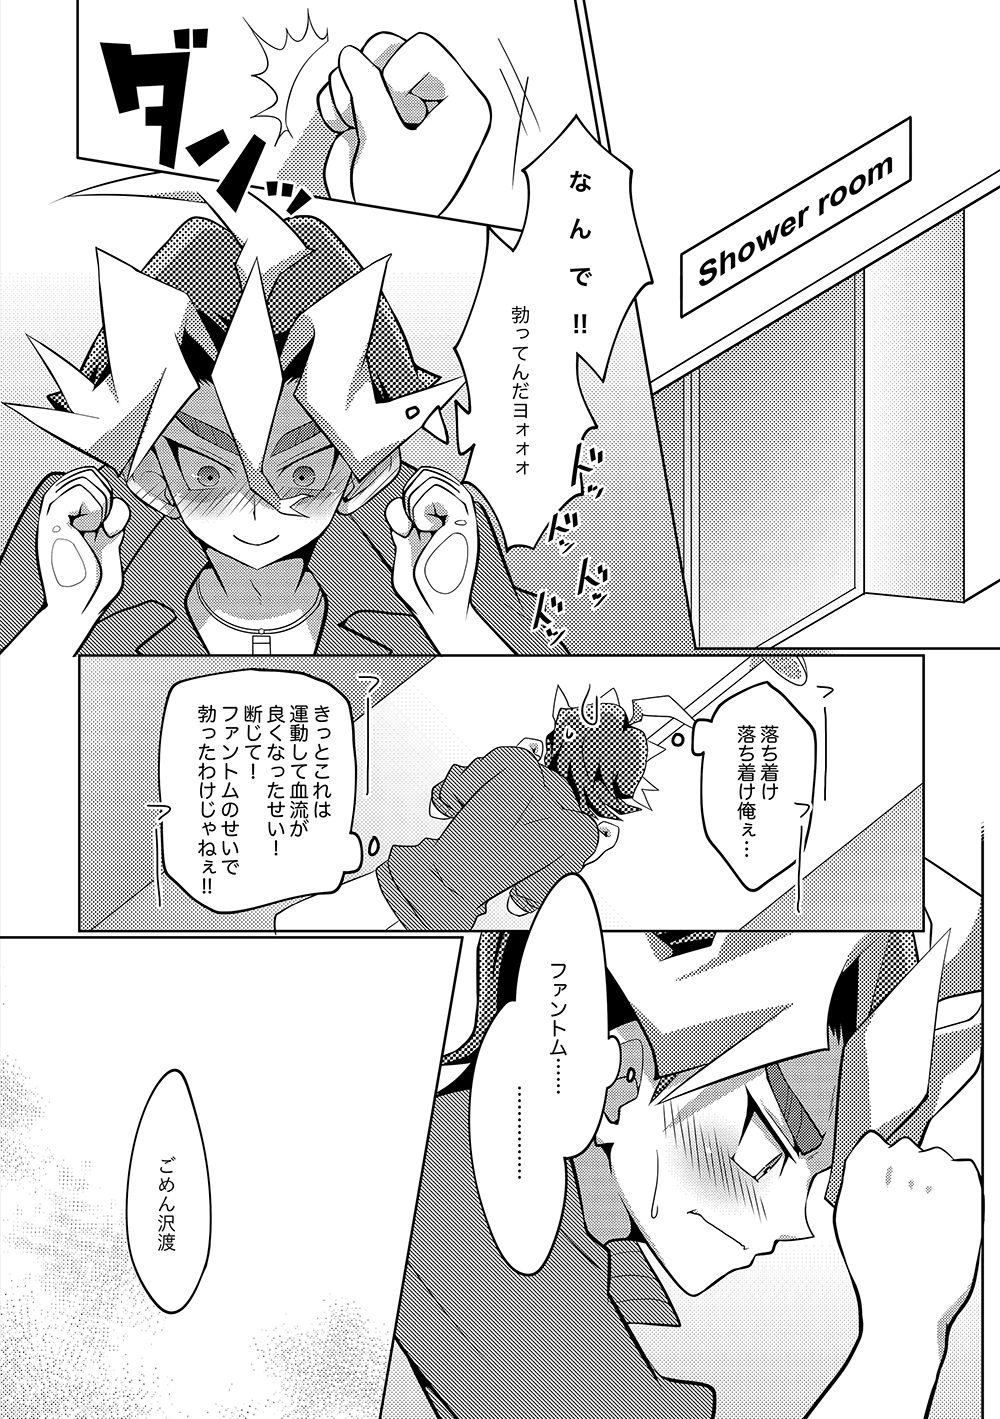 Stepdad SxS H! ANOTHER - Yu-gi-oh arc-v Ametur Porn - Page 7